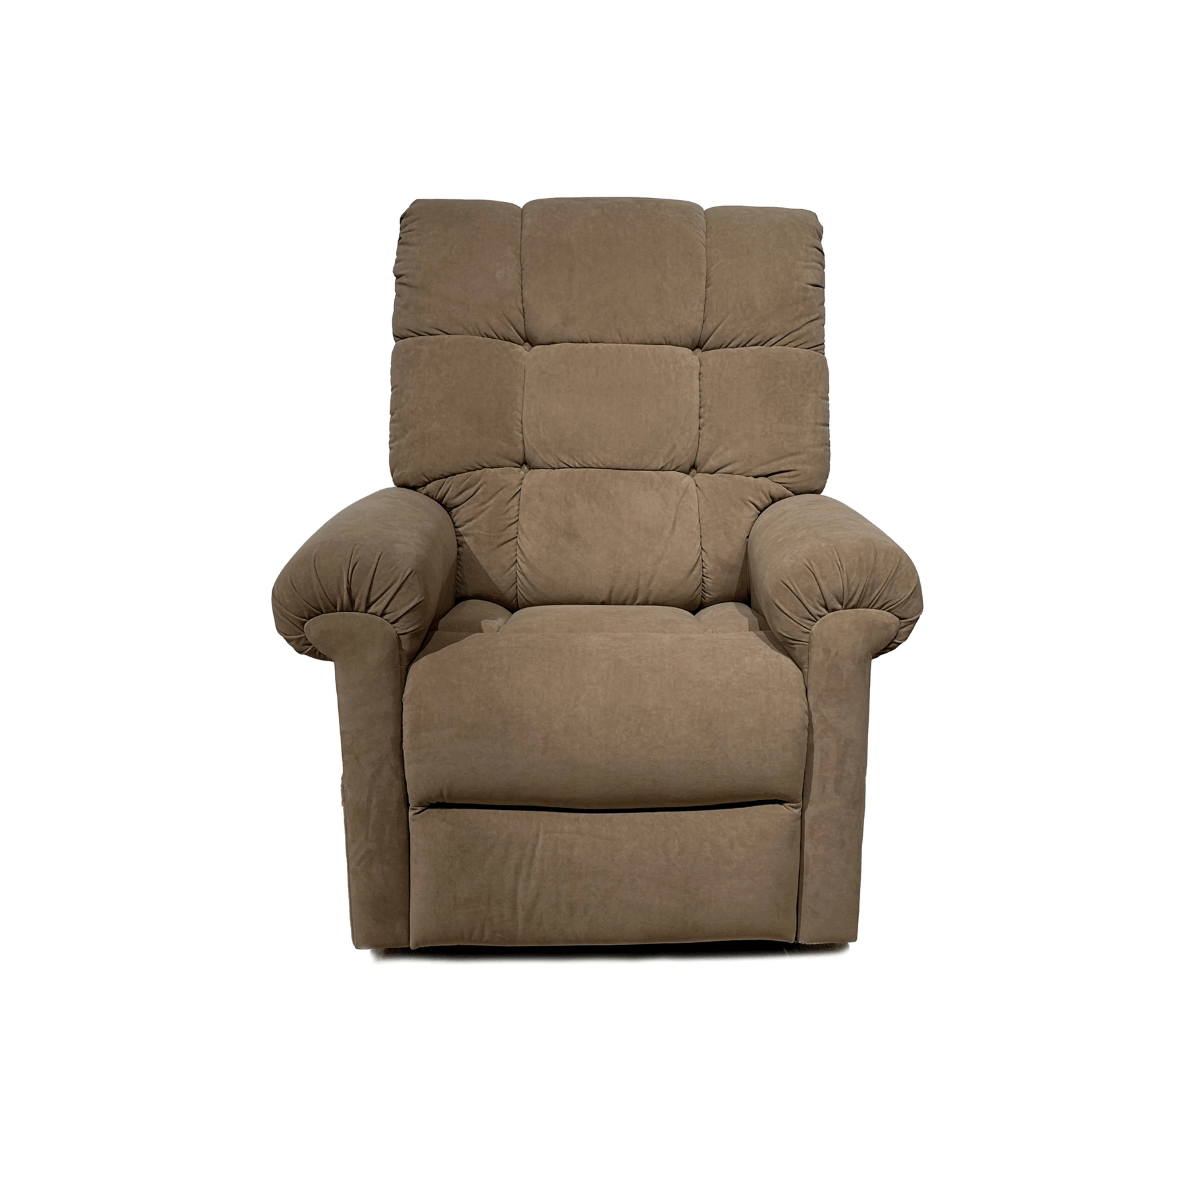 Journey Perfect Sleep Chair in dark moss color sitting upright facing forward with padded armrests and lots of cushioning